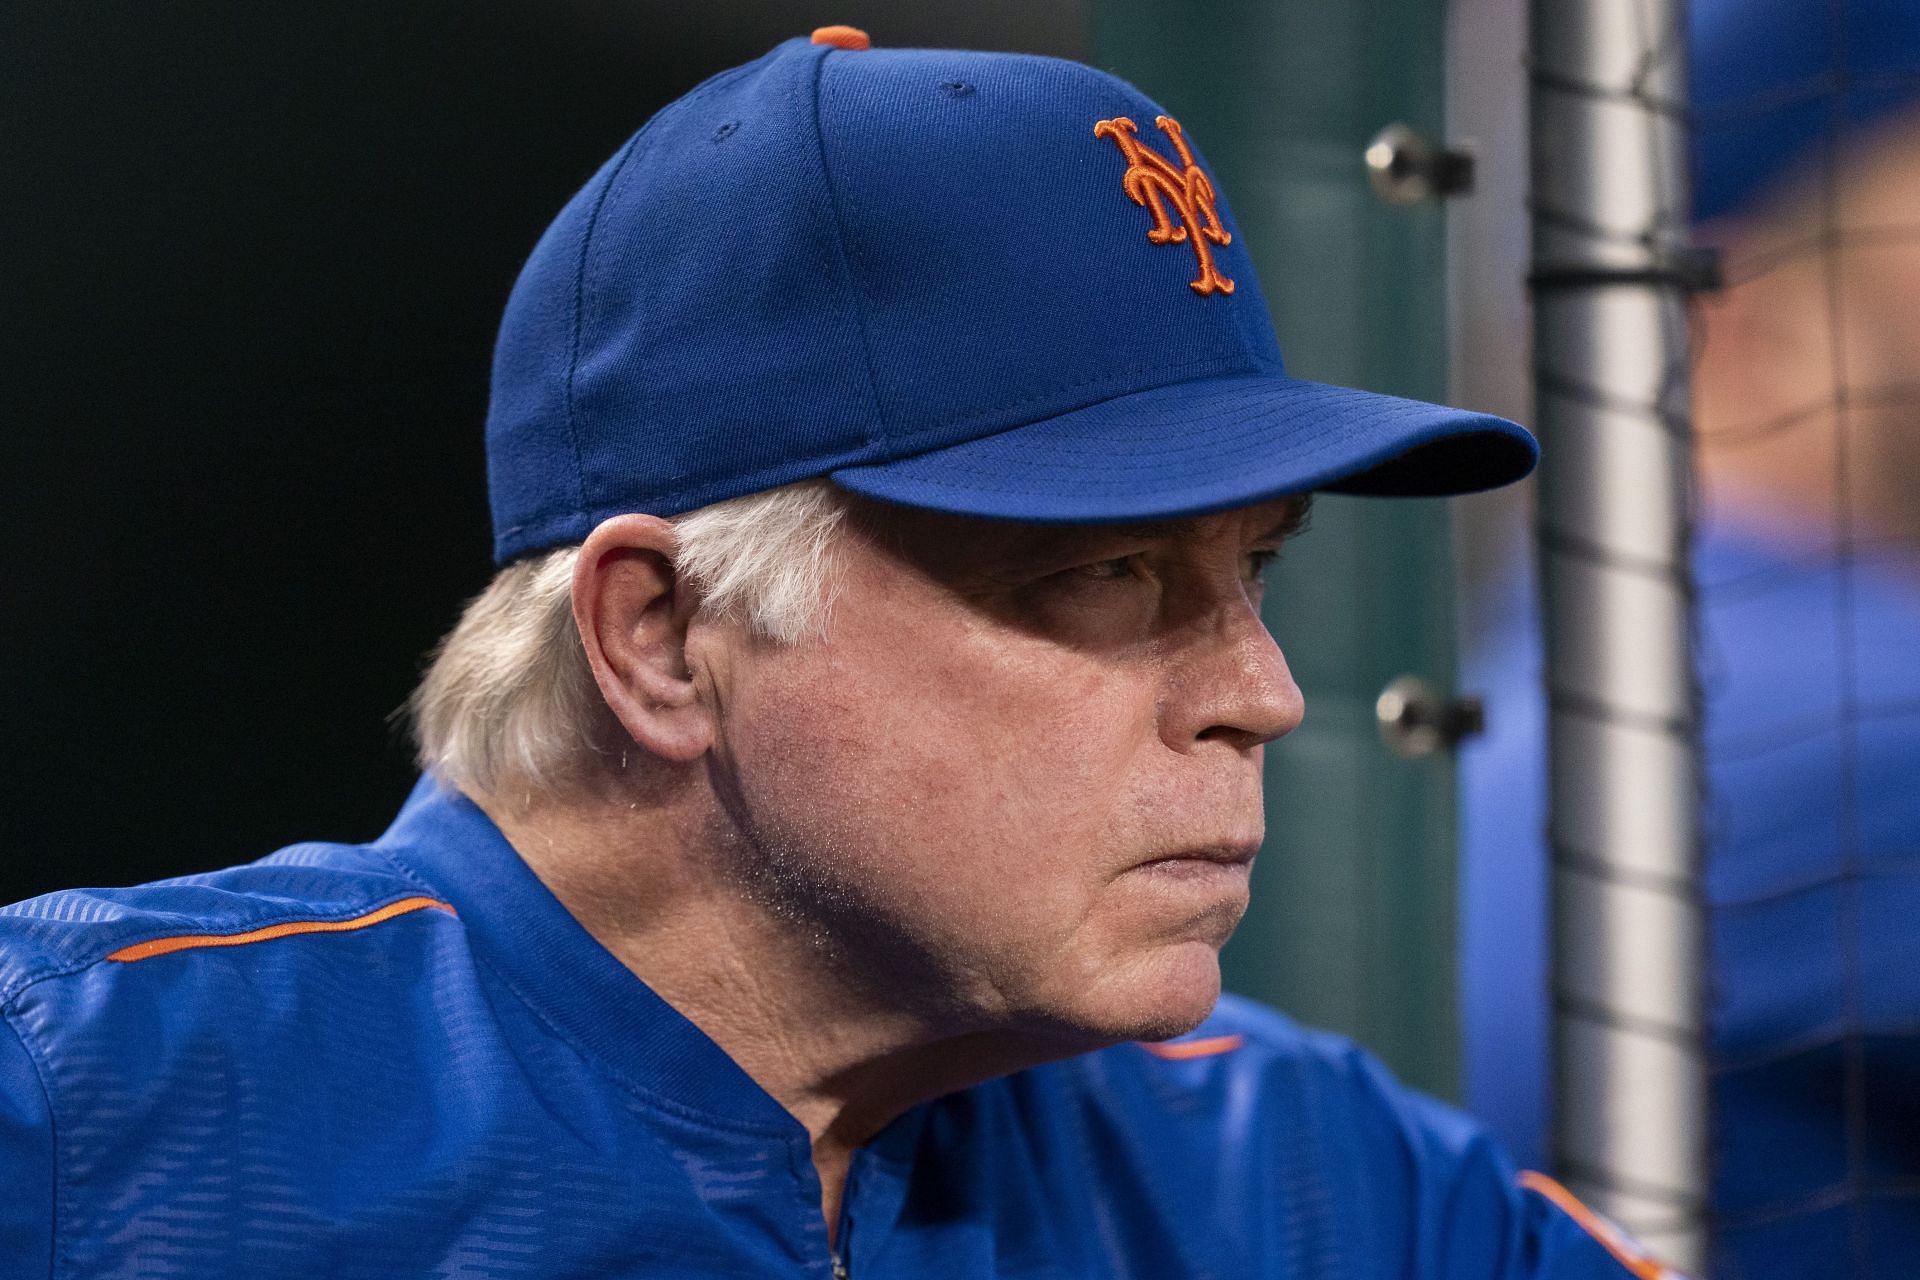 Buck Showalter's way held up when it mattered most for Mets